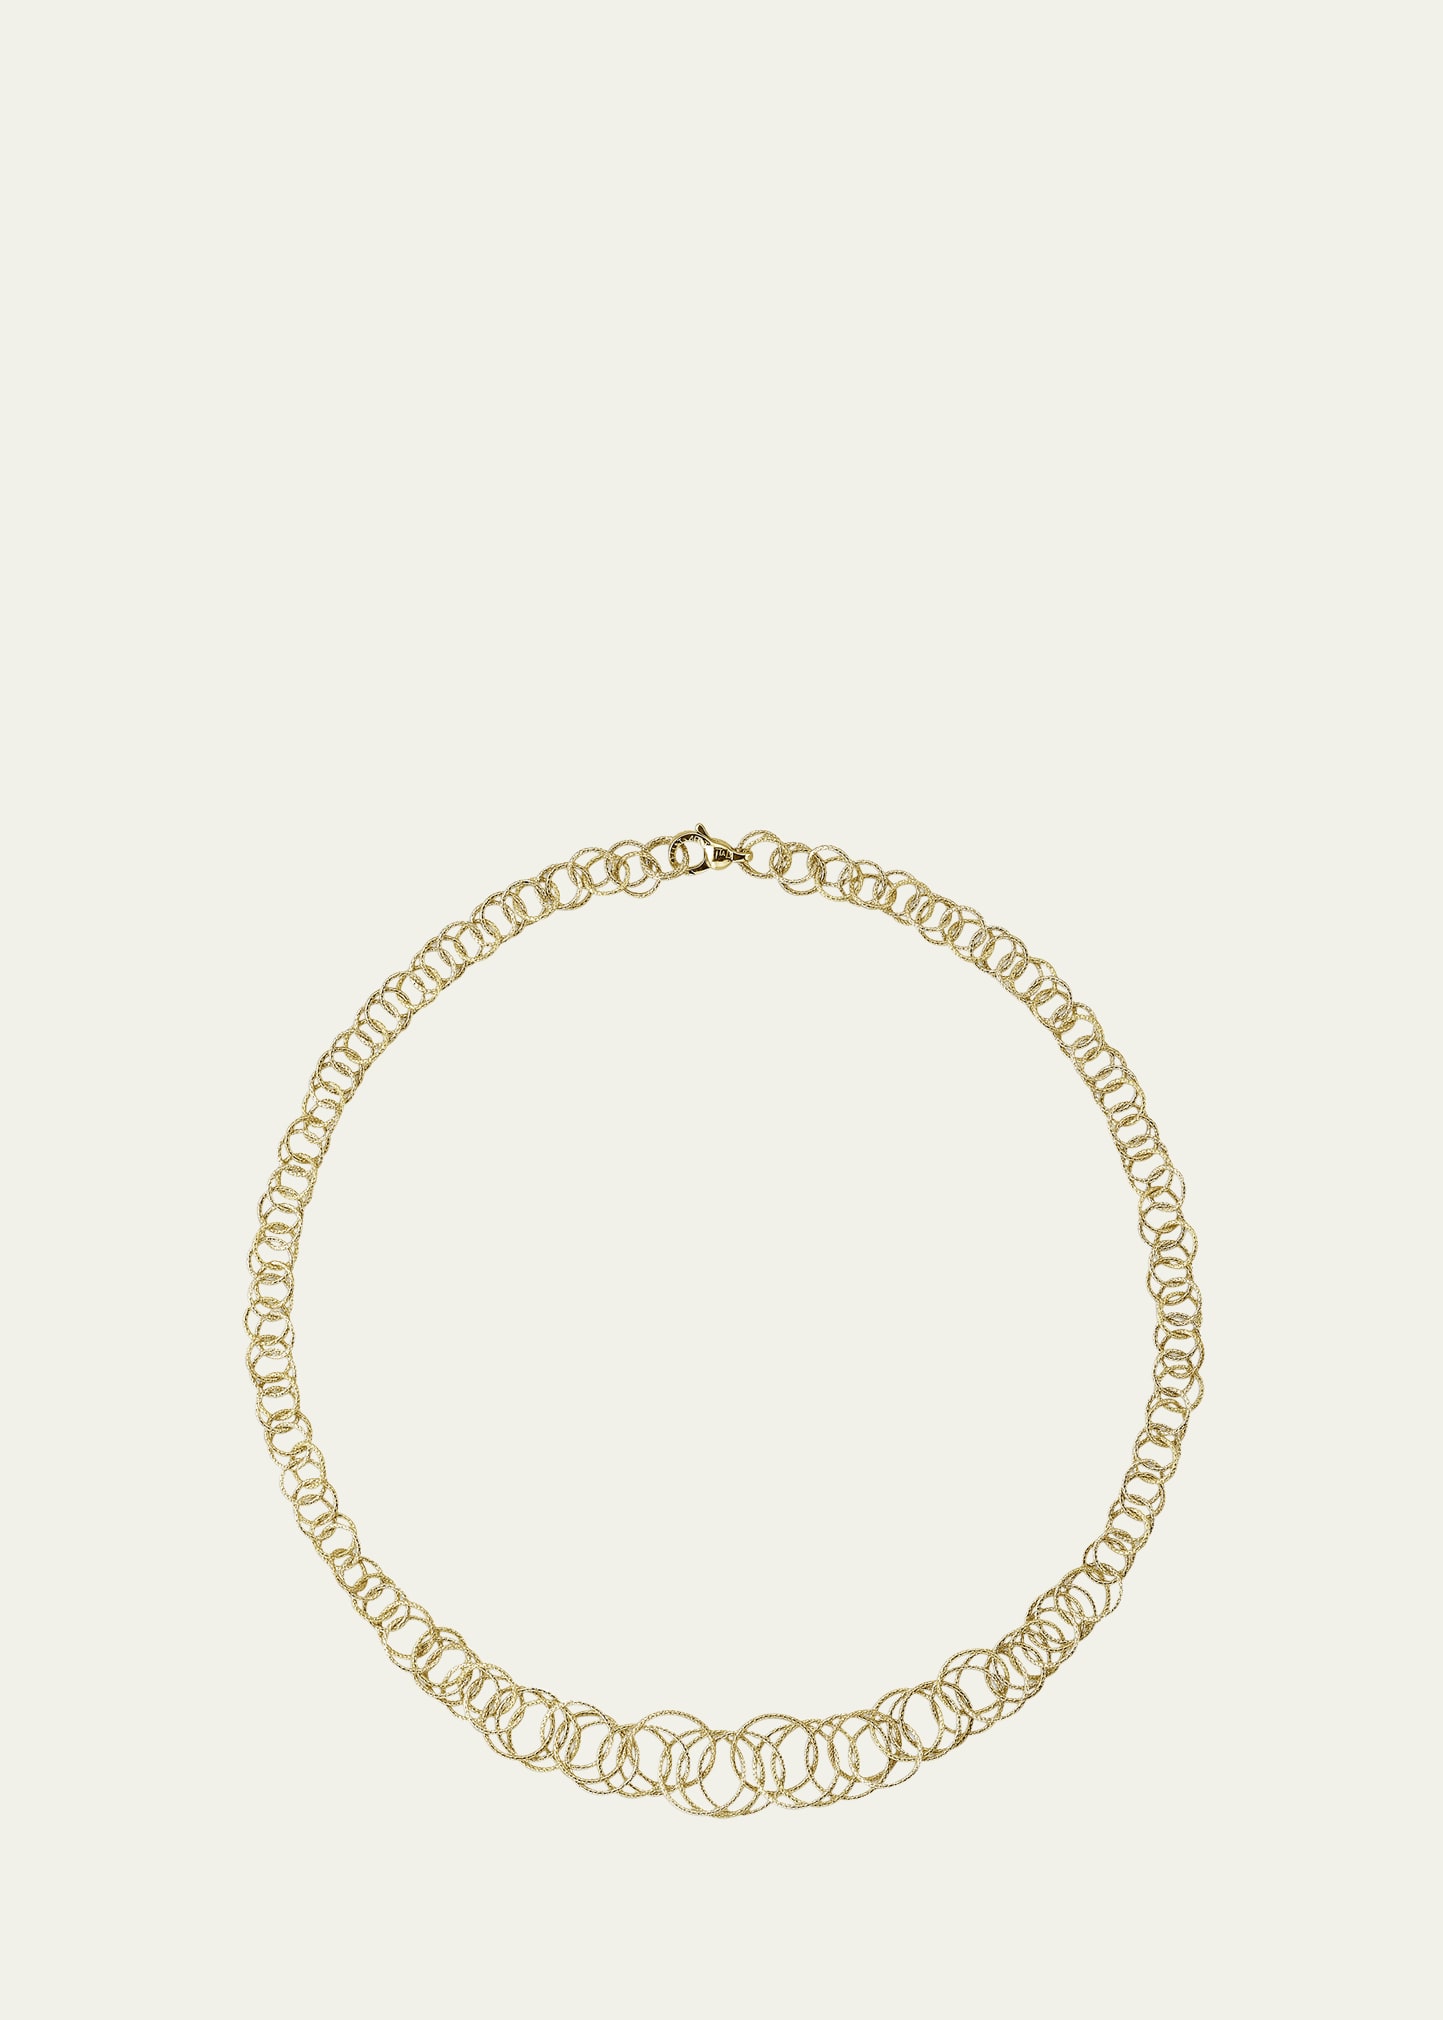 Hawaii Variegated Link 18K Yellow Gold Short Necklace, 45cm